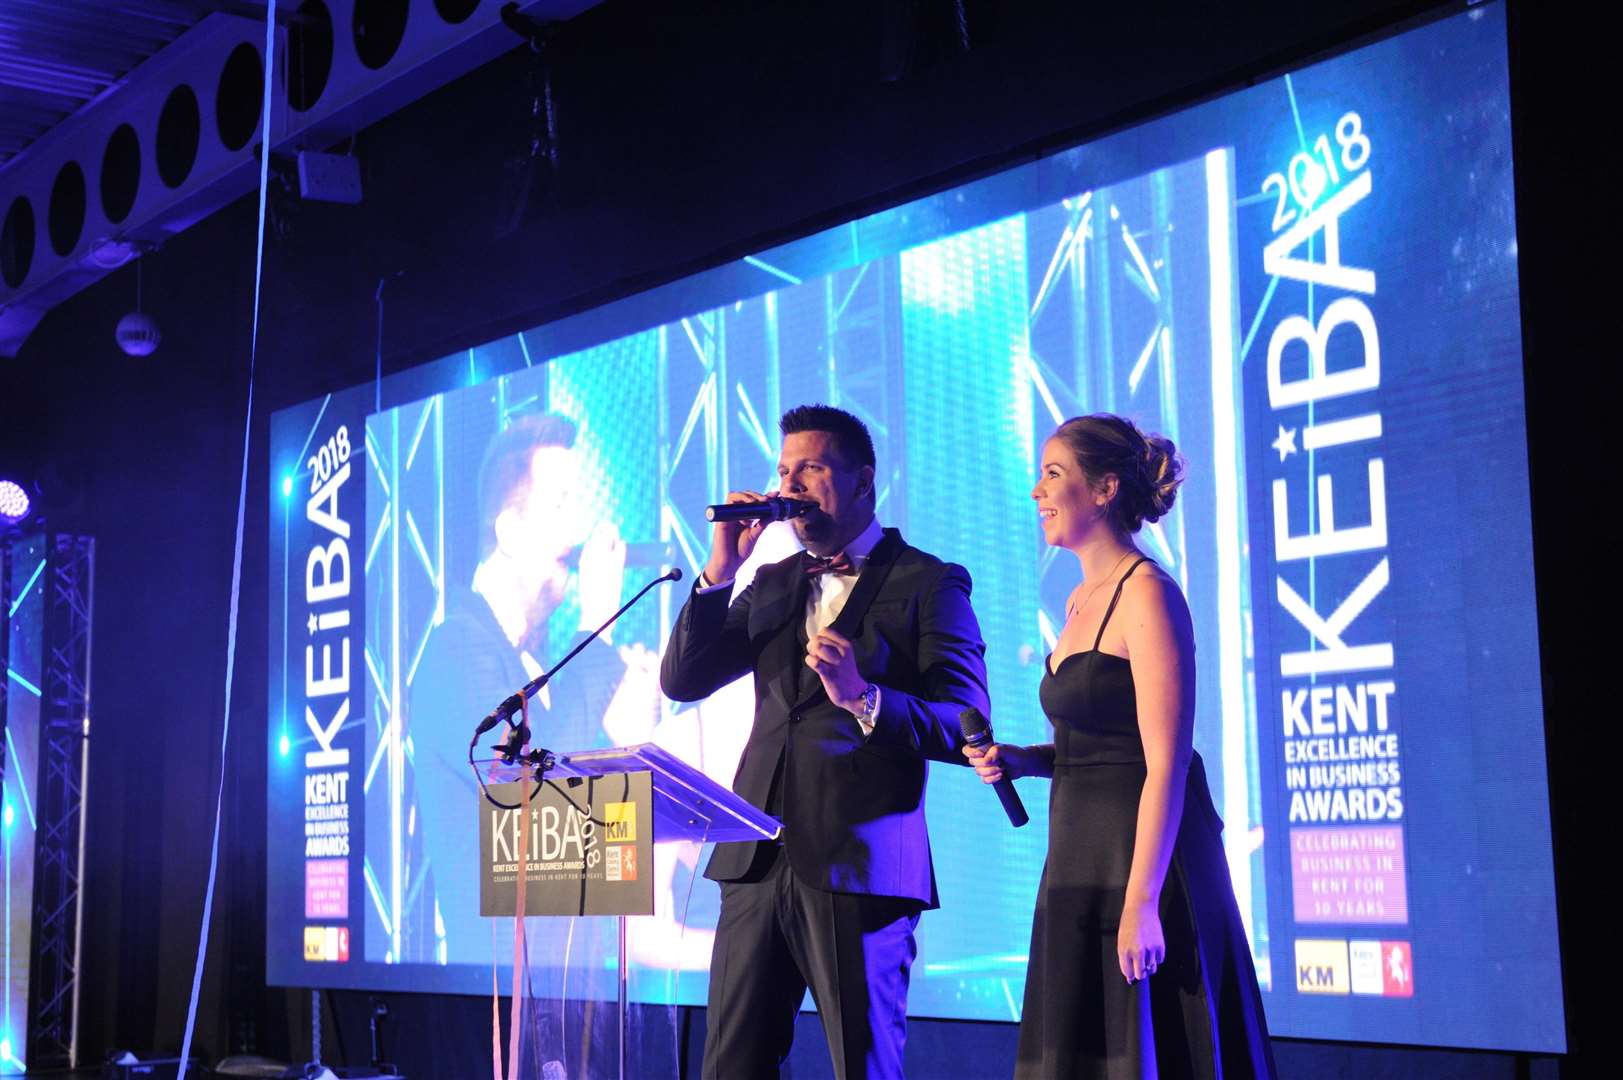 Hosts present last year's KEiBA awards ceremony at the Kent Event Centre